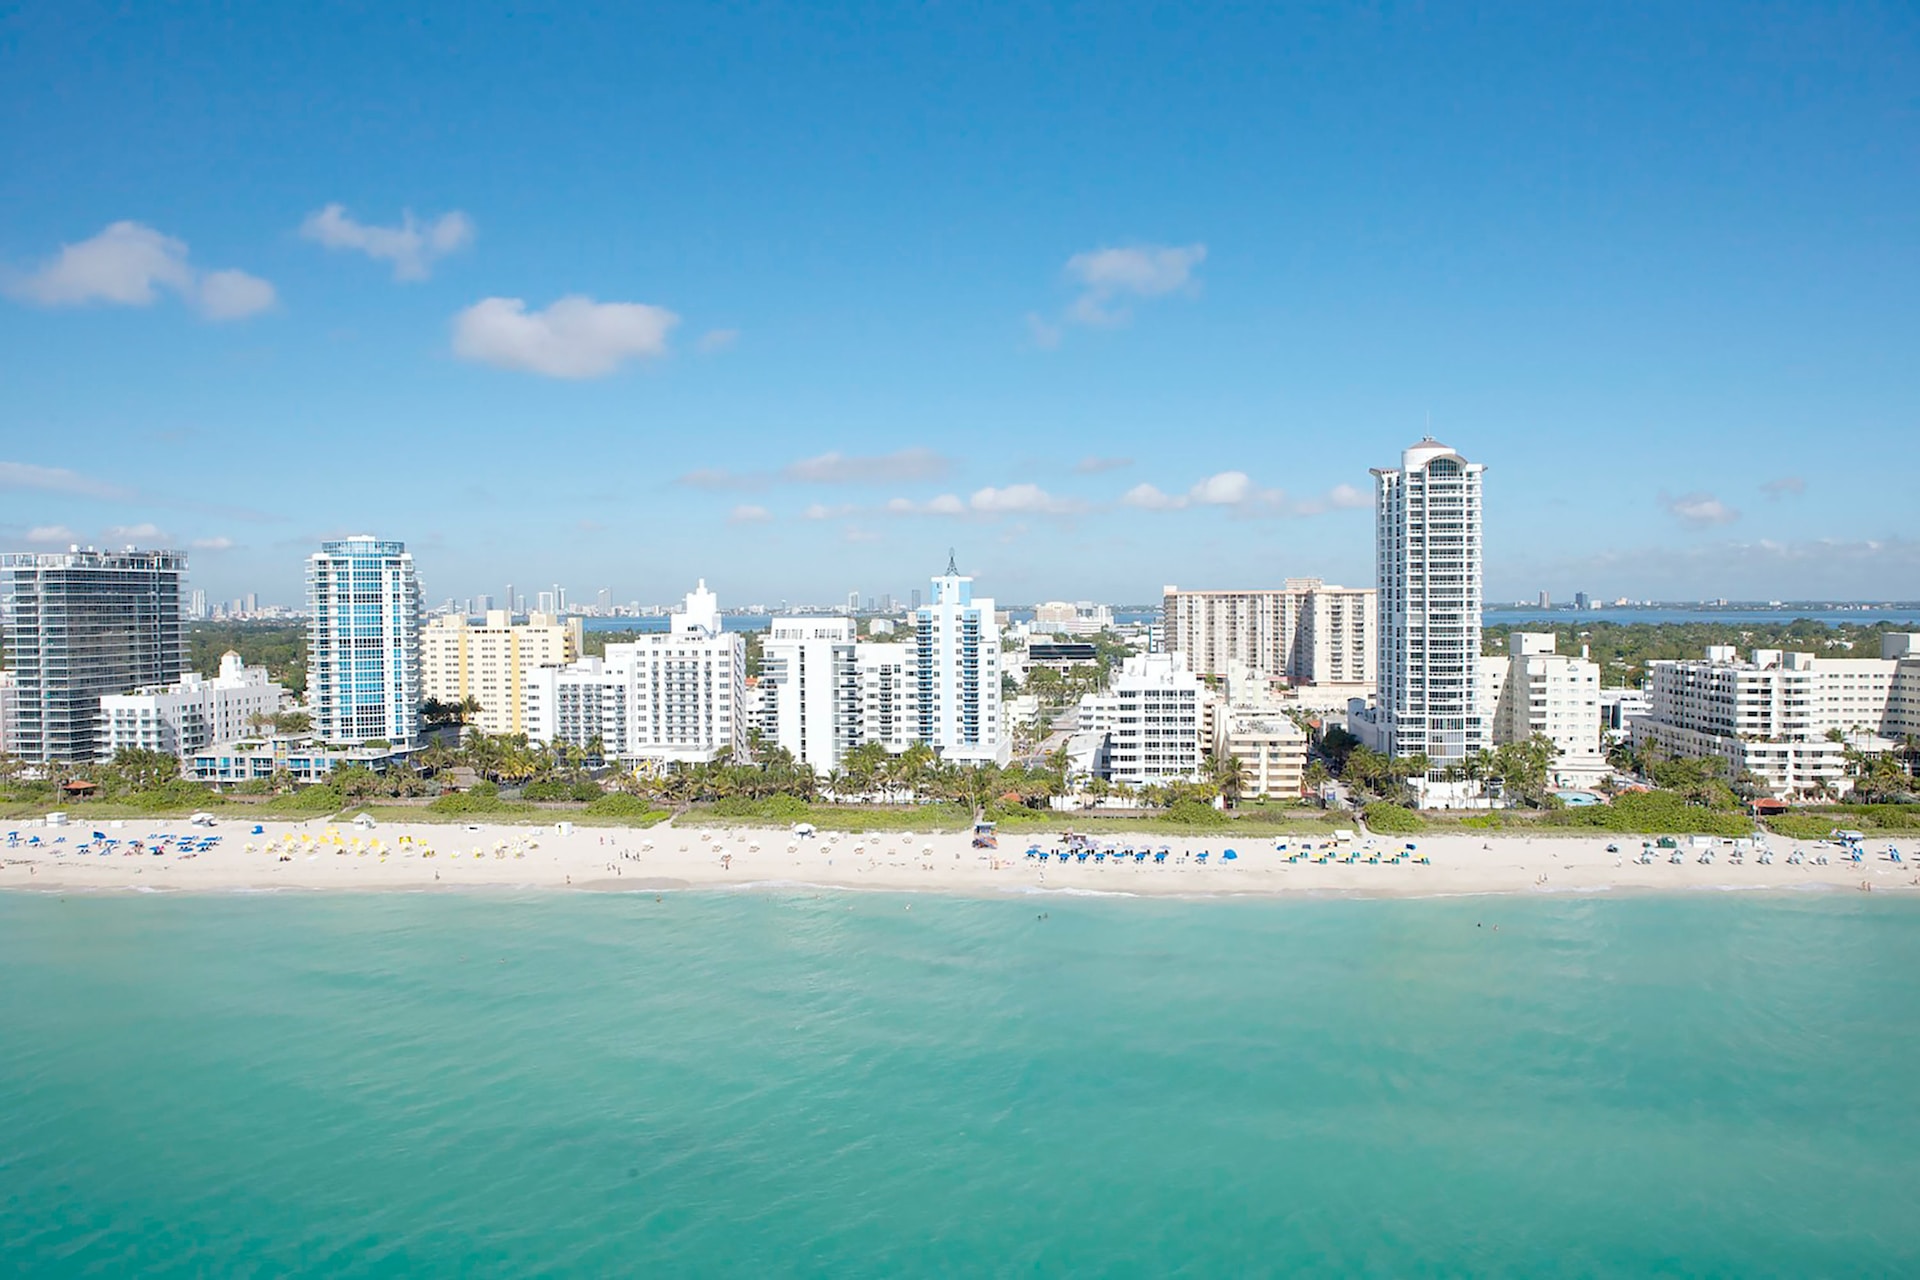 Miami Travel Guide for Digital Nomads